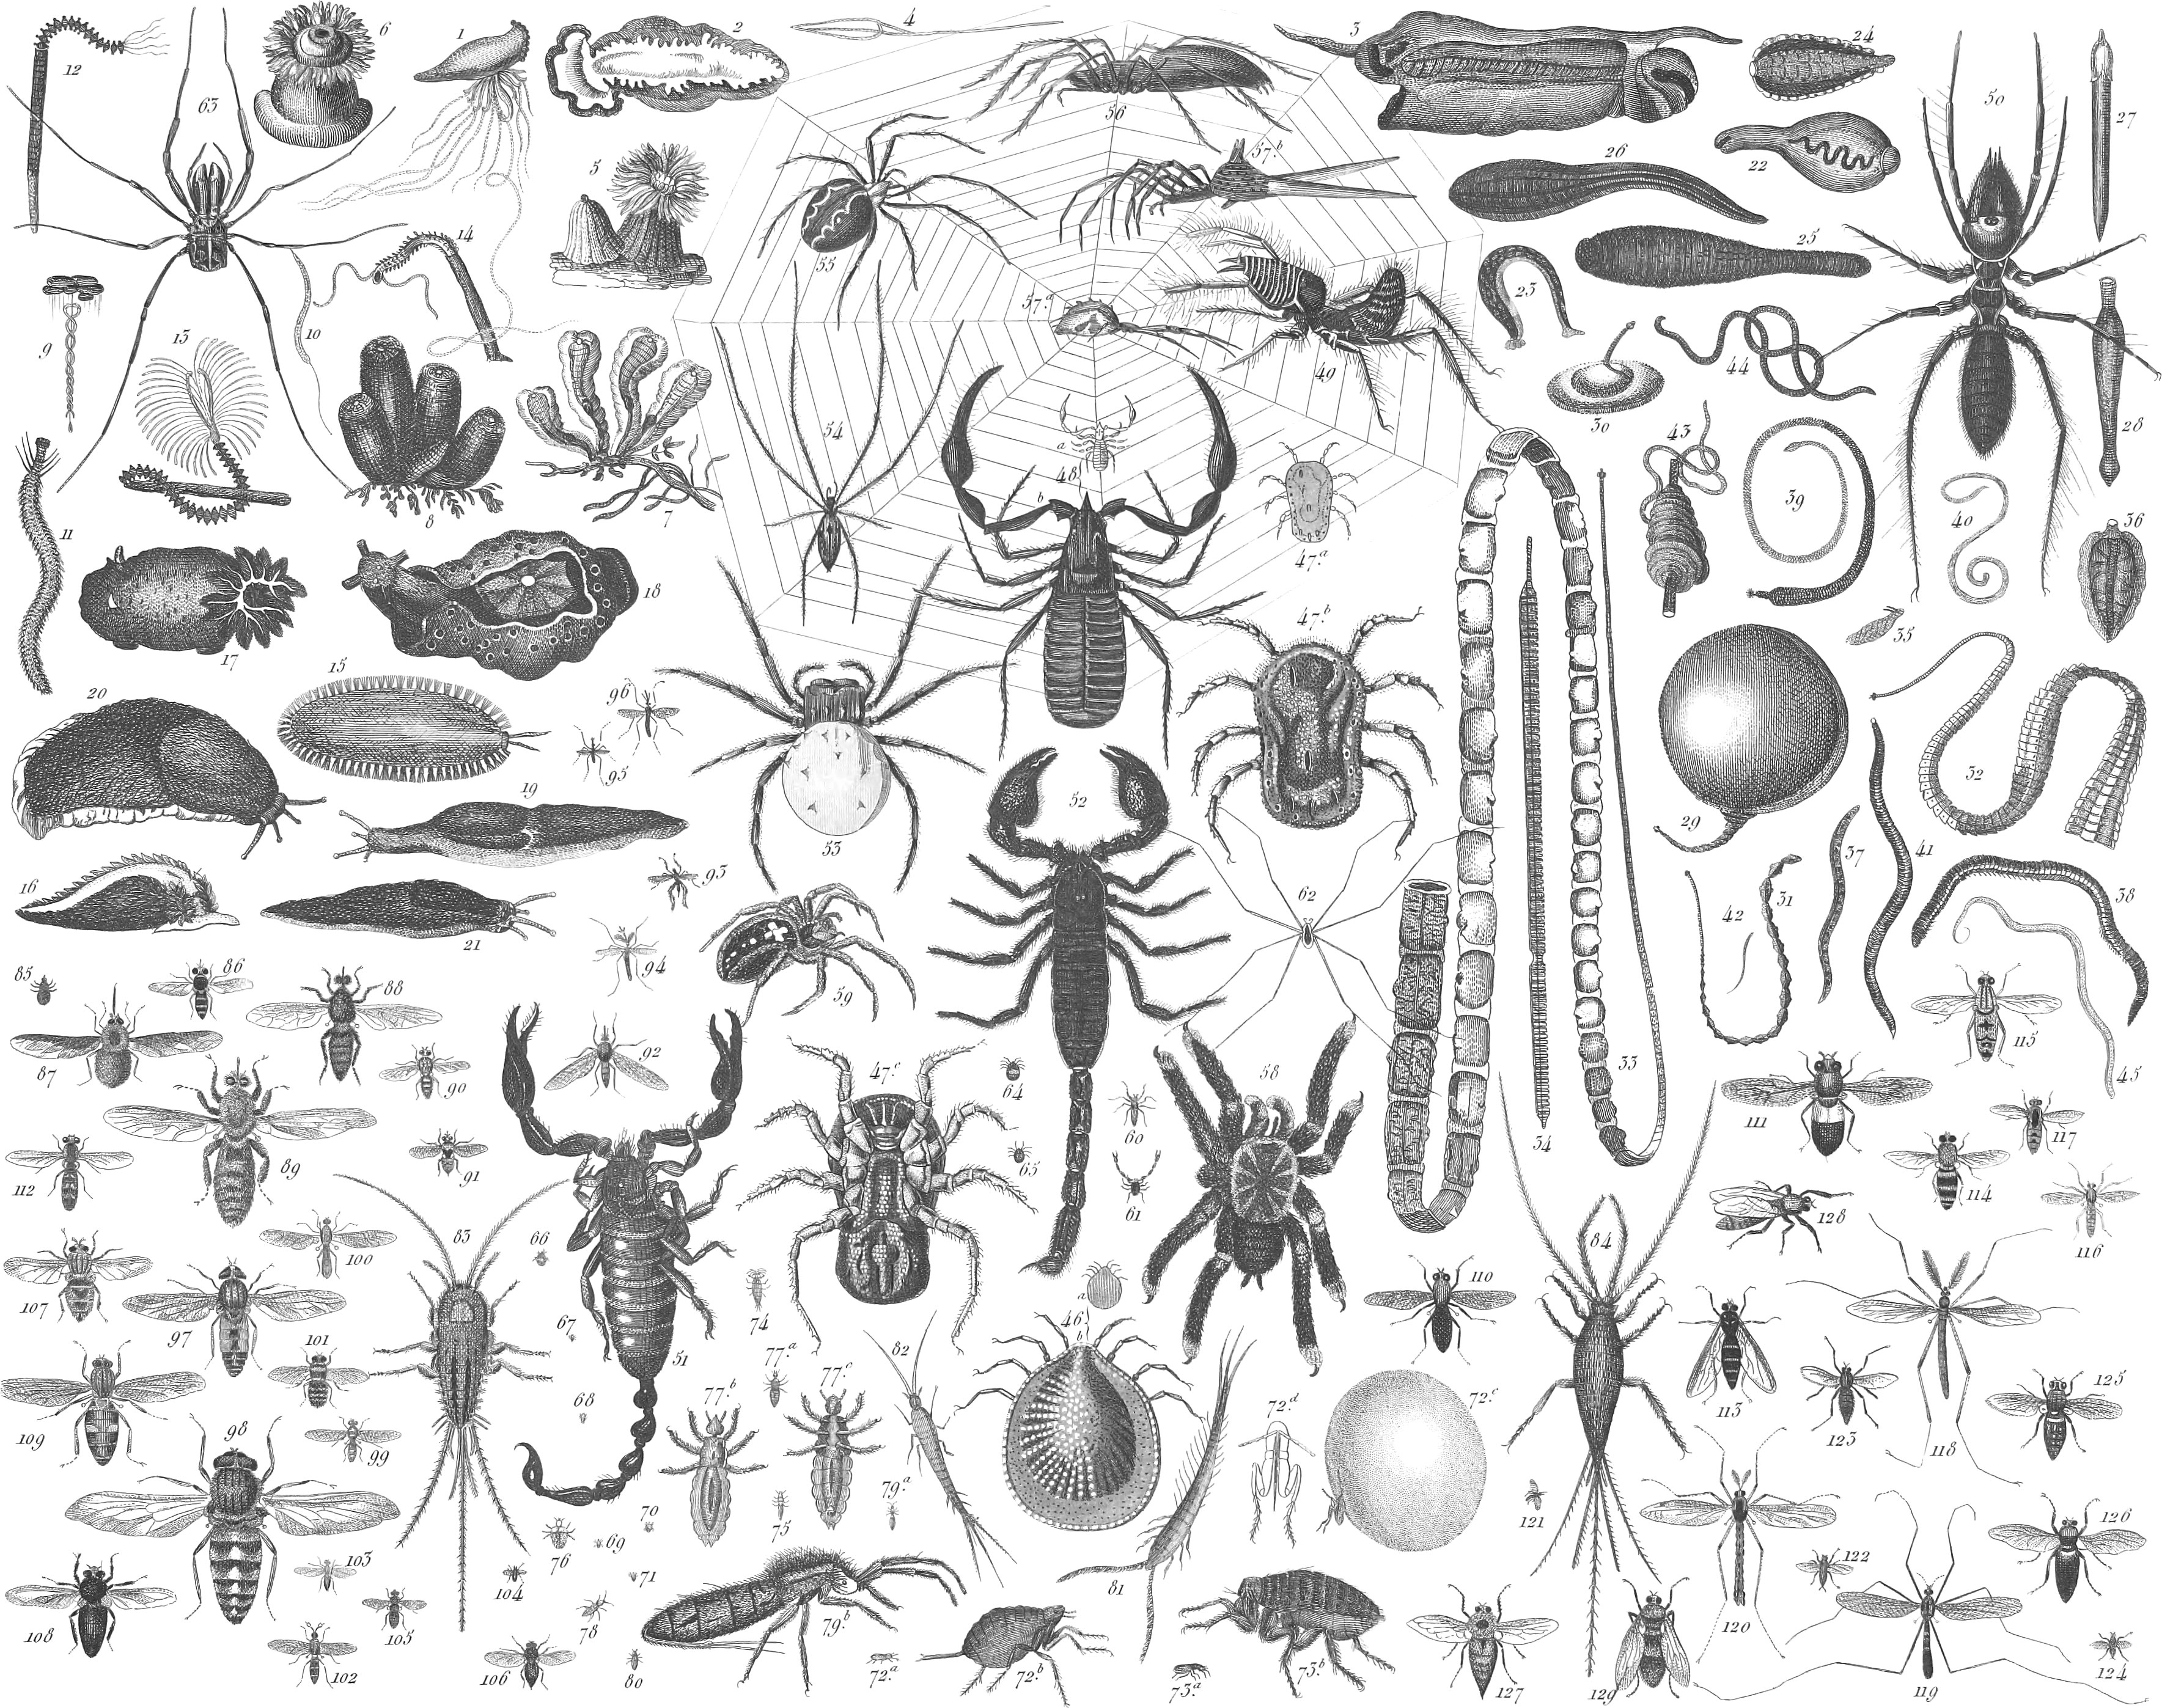 Zoology - Iconographic Encyclopædia of Science, Literature, and Art